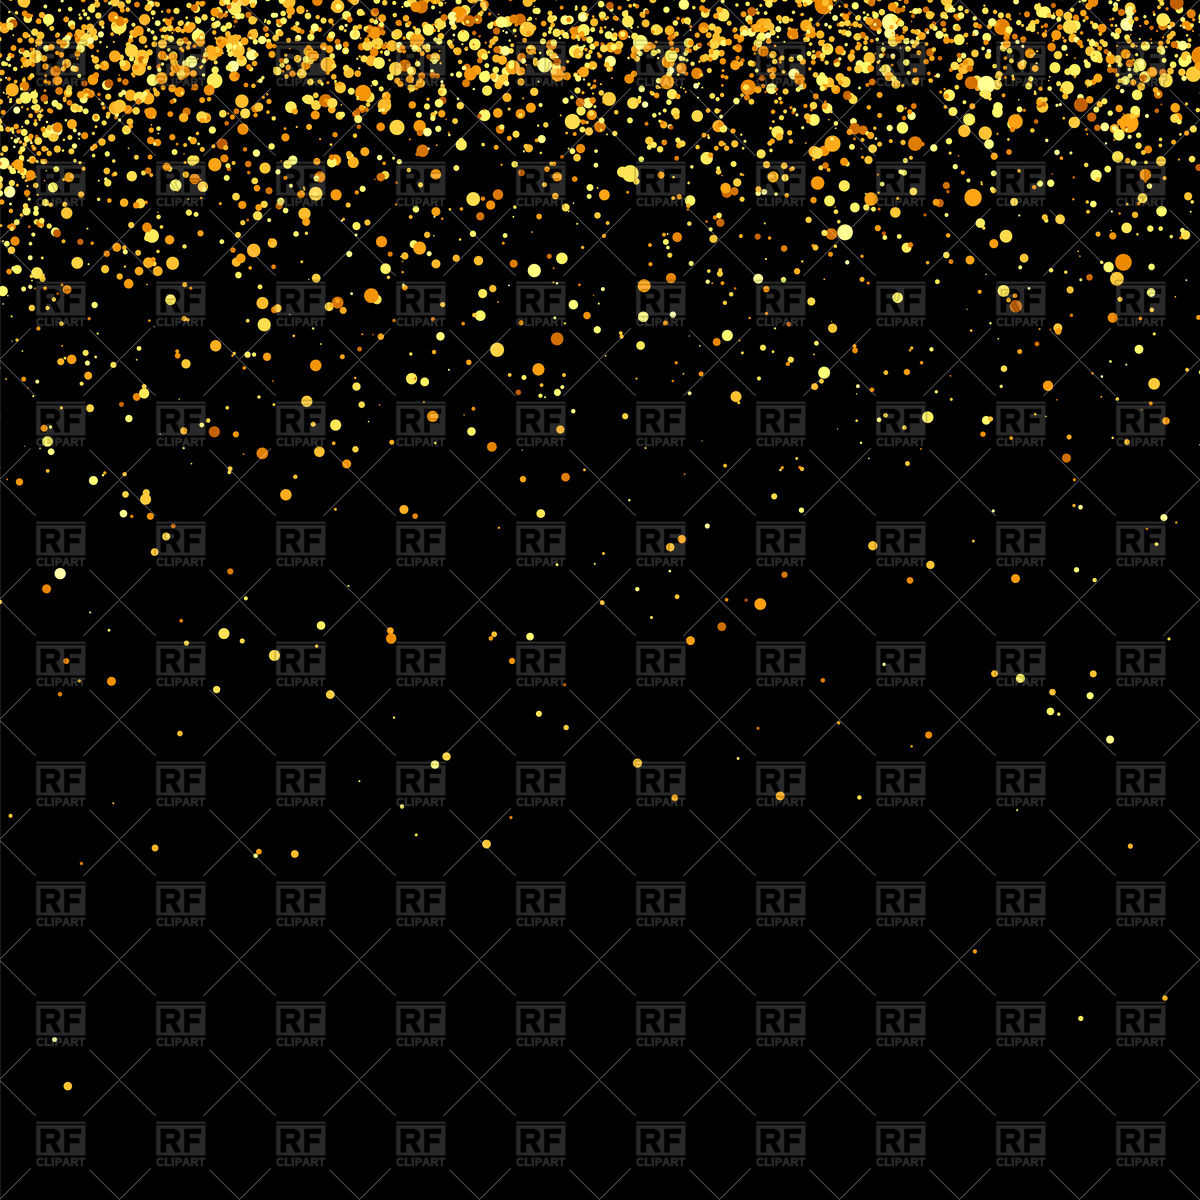 Yellow And Orange Confetti On Black Background Vector Image Of